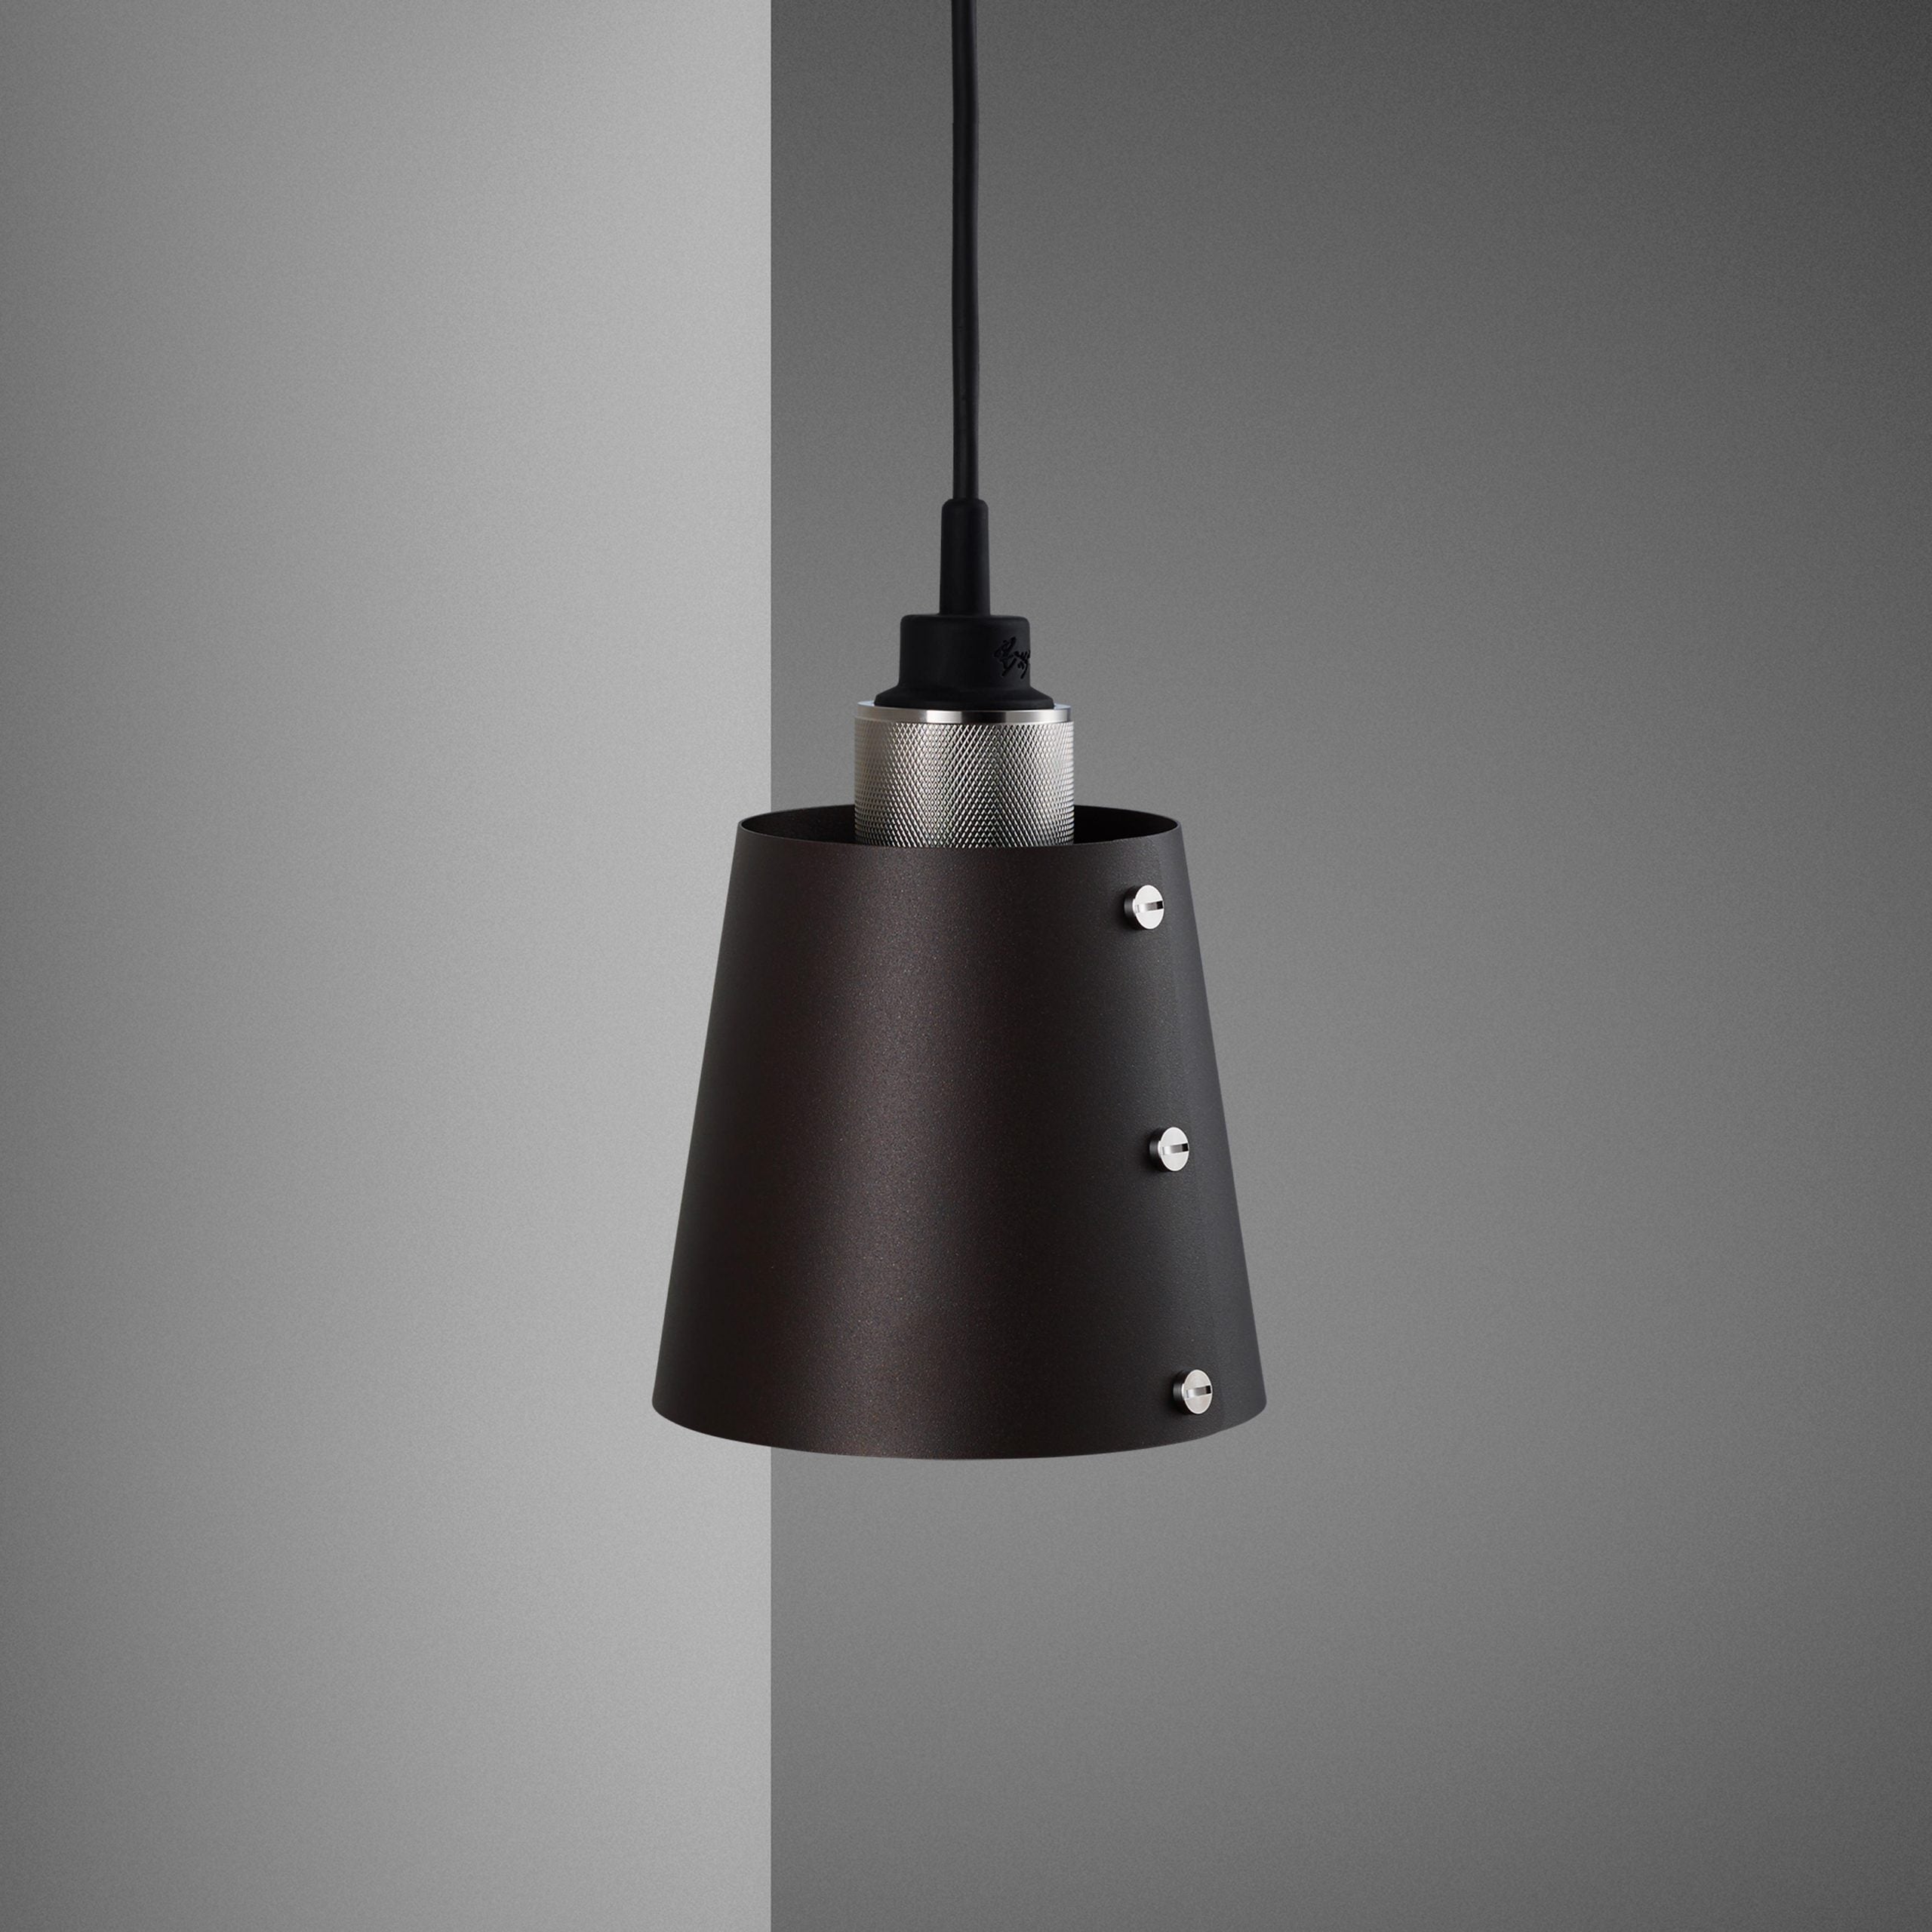 Buster + Punch Hooked Wall Sconce Wall Light Fixtures Buster + Punch Graphite/Steel & Graphite Shade Small 